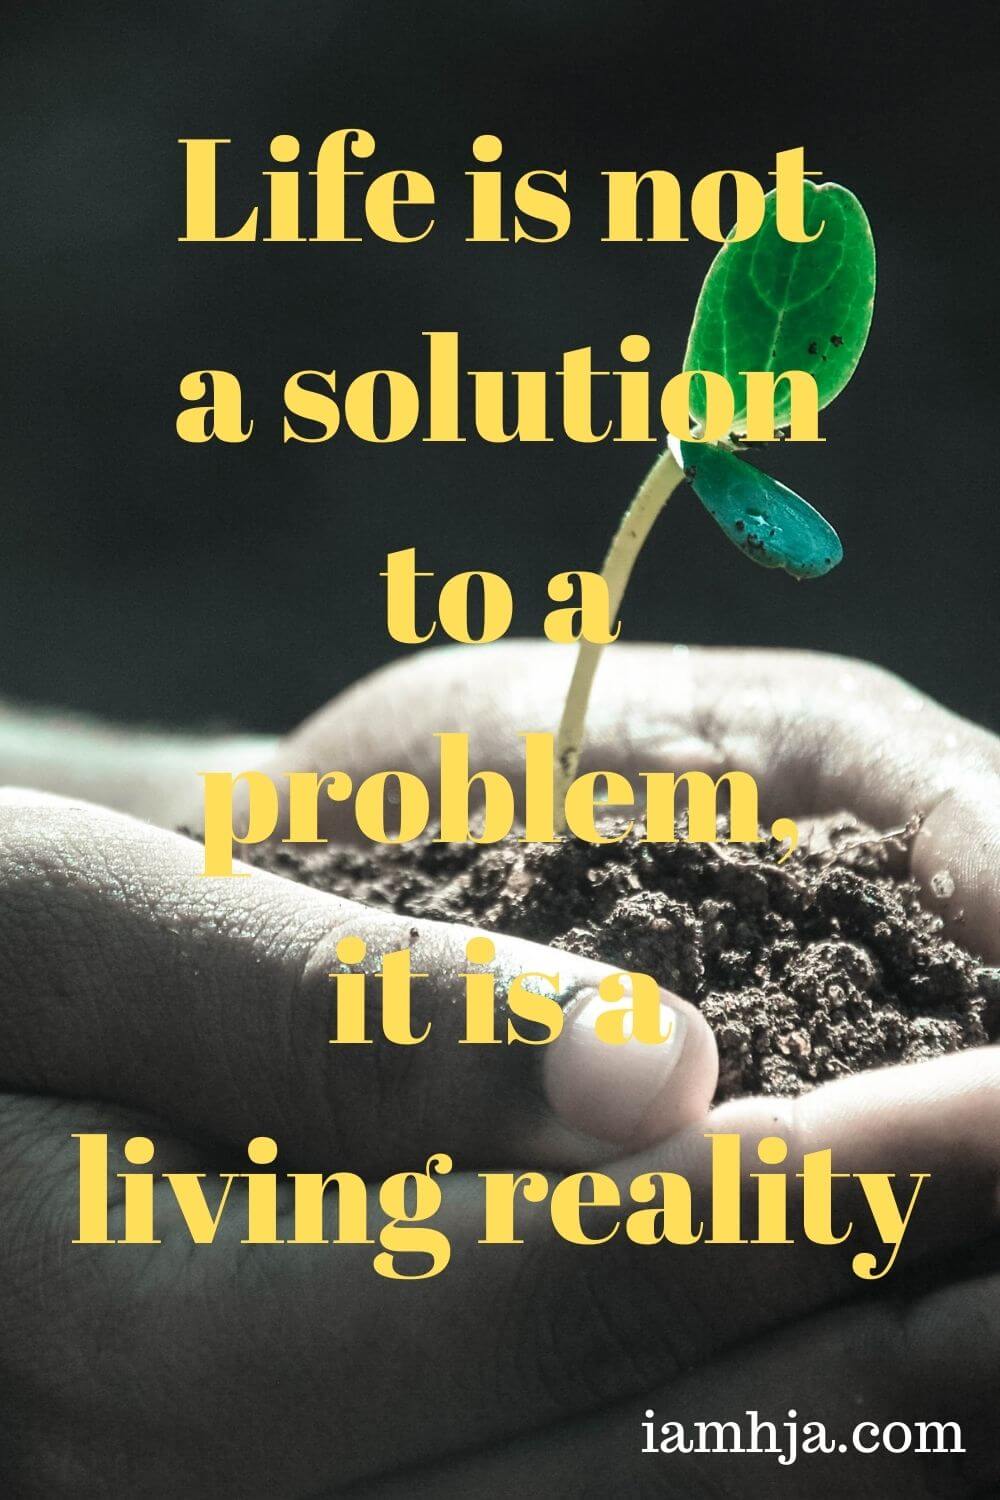 Life is not a solution to a problem, it is a living reality